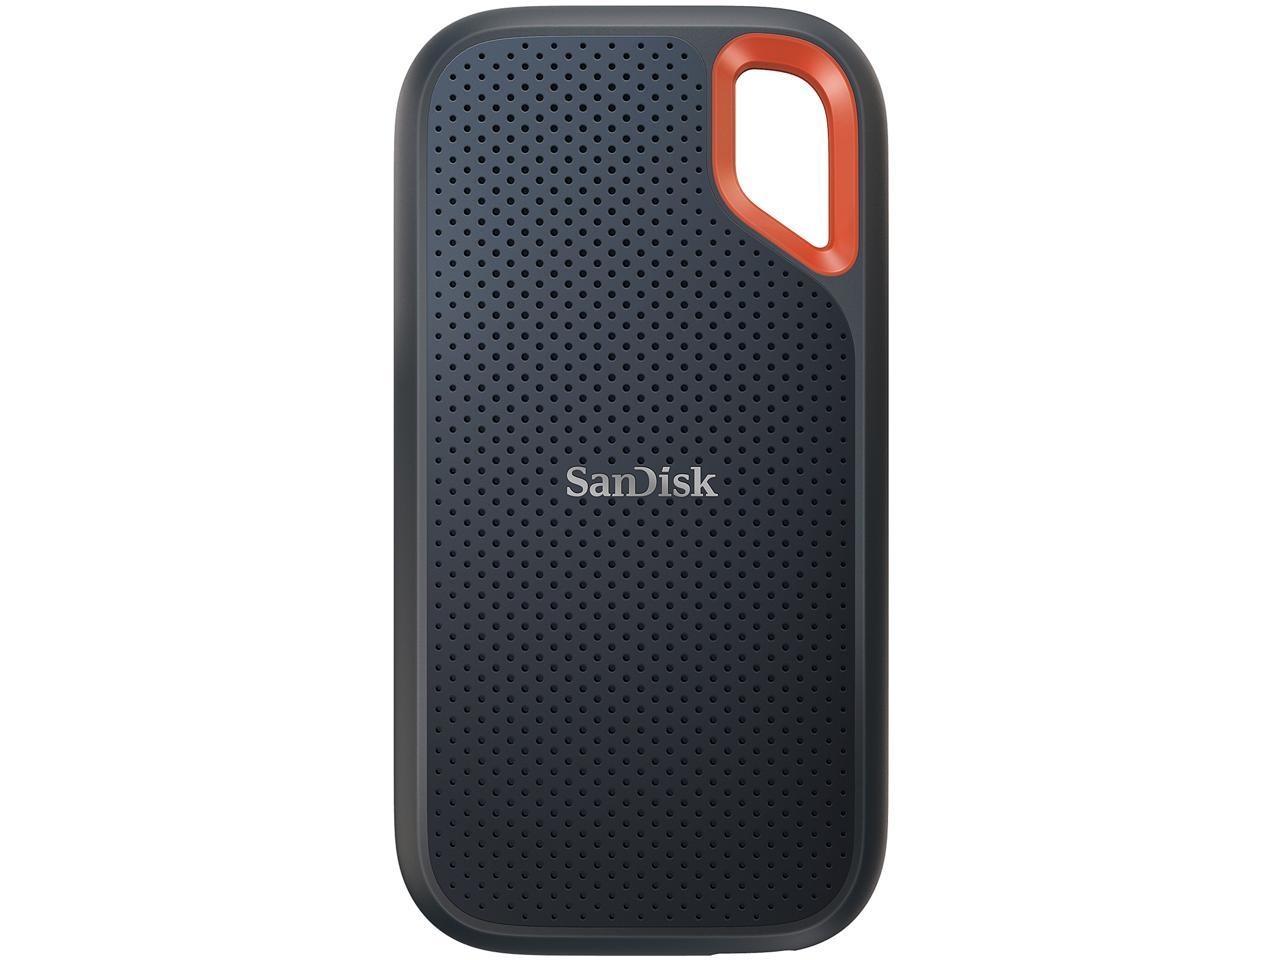 SanDisk 1TB Extreme Portable SSD - Up to 1050MB/s - USB-C, USB 3.2 Gen 2 - External Solid State Drive - SDSSDE61-1T00-G25